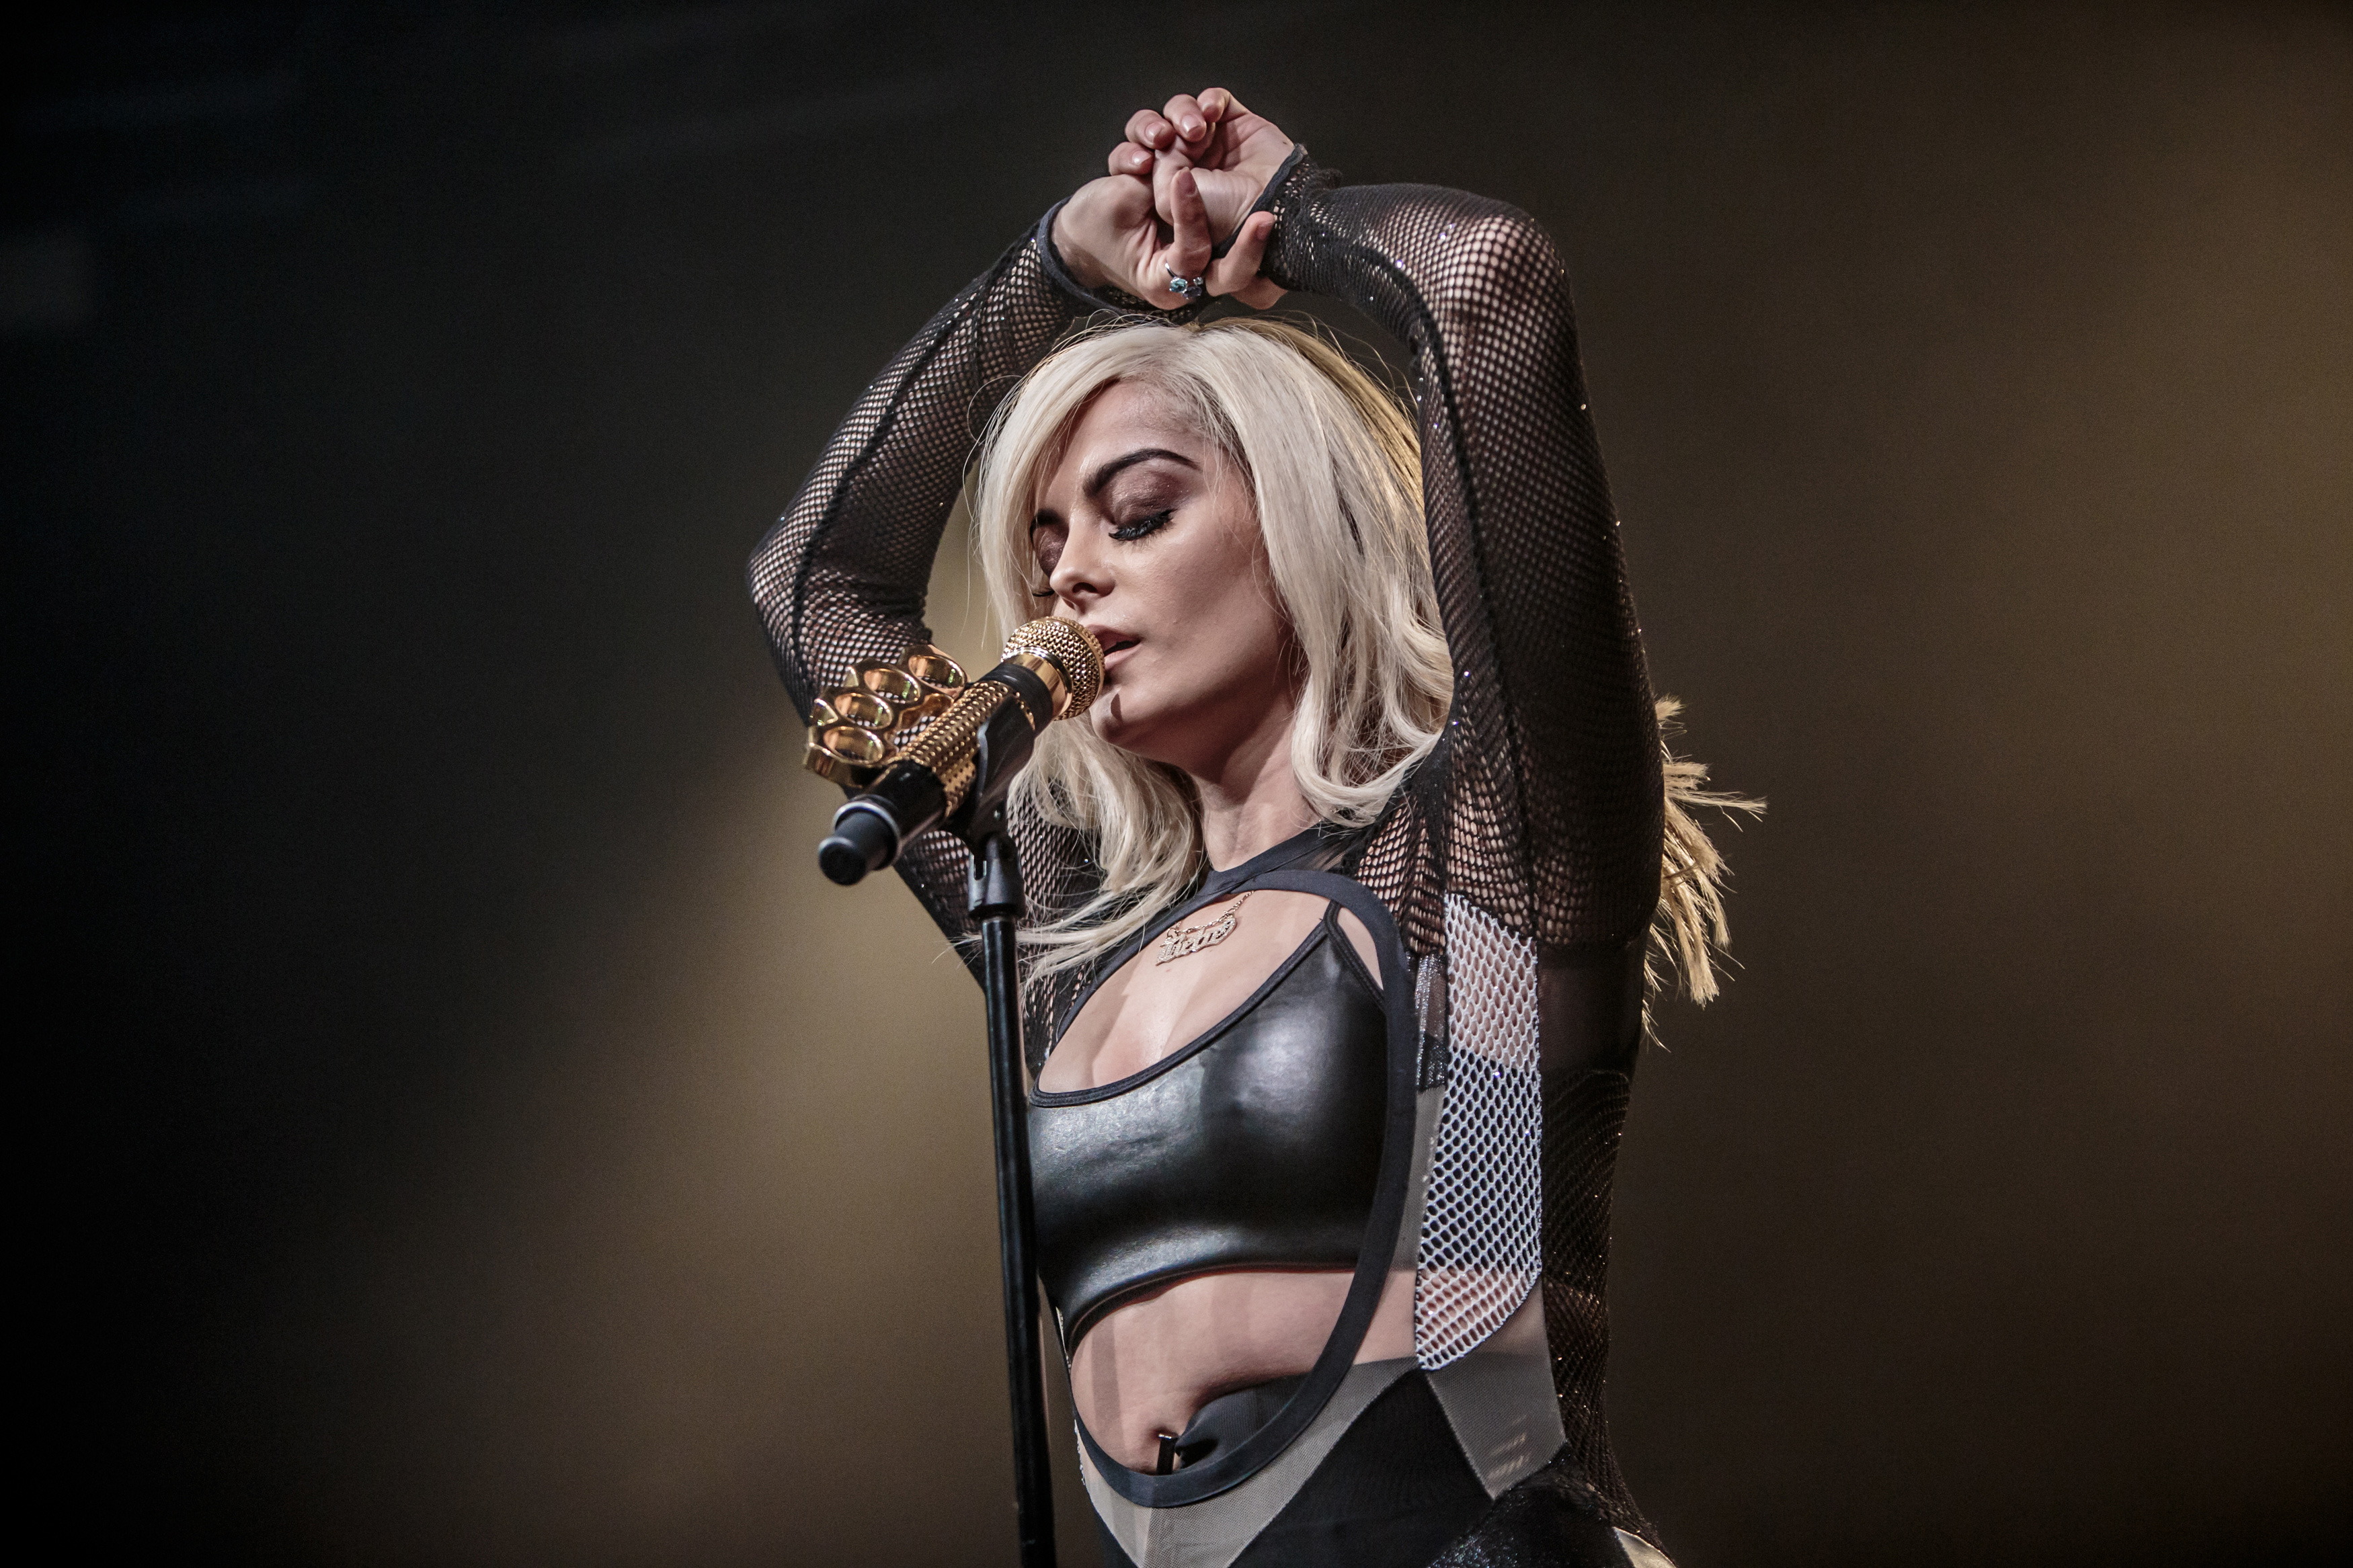 Bebe Rexha Live Performace Wallpapers